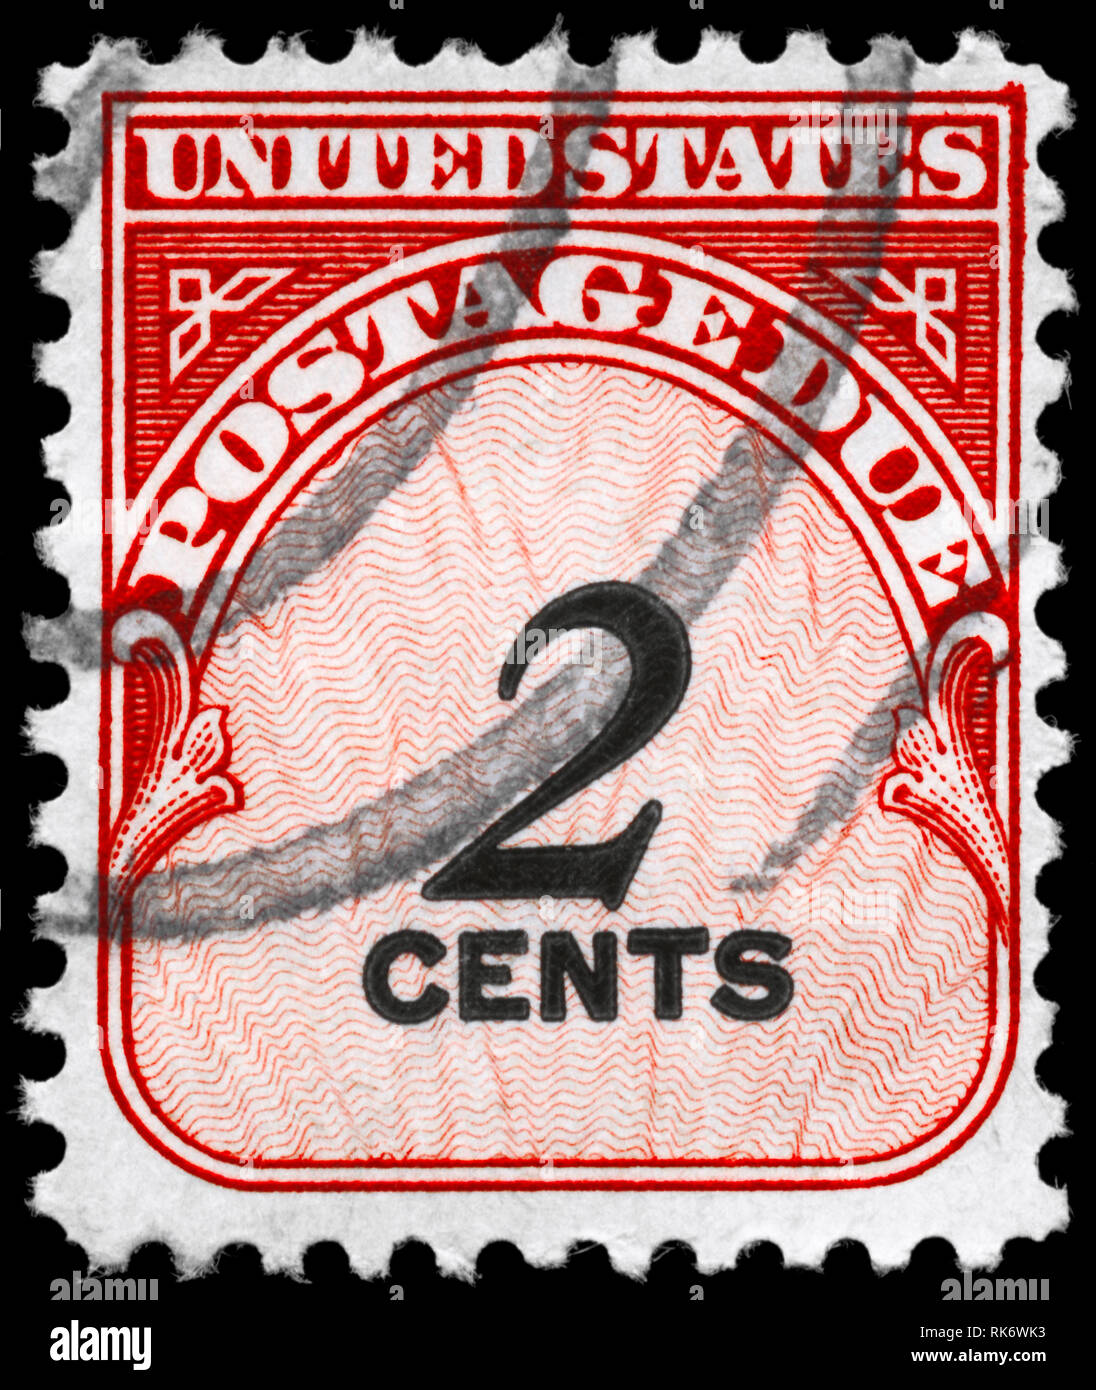 USA - CIRCA 1959: A Stamp printed in USA shows the Stamp with denomination 2c value, circa 1959 Stock Photo